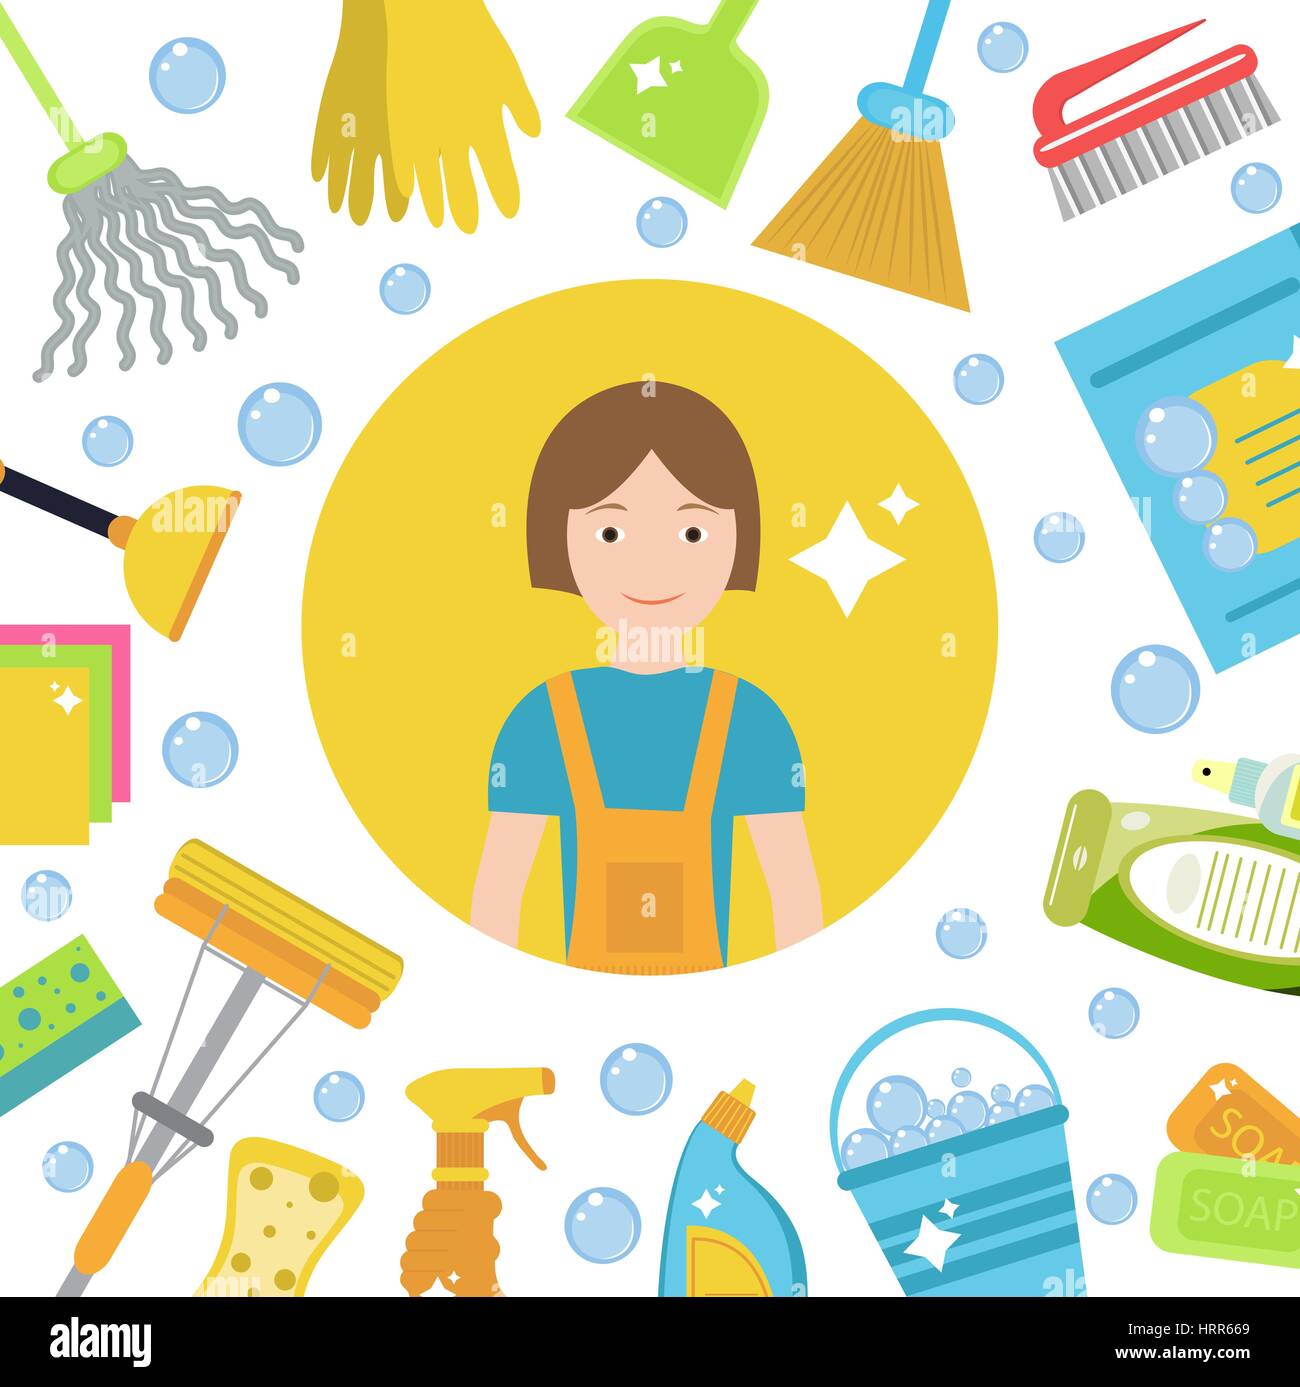 Set of icons for cleaning tools. House cleaning staff. Flat design style. Cleaning design elements. Vector illustration Stock Vector